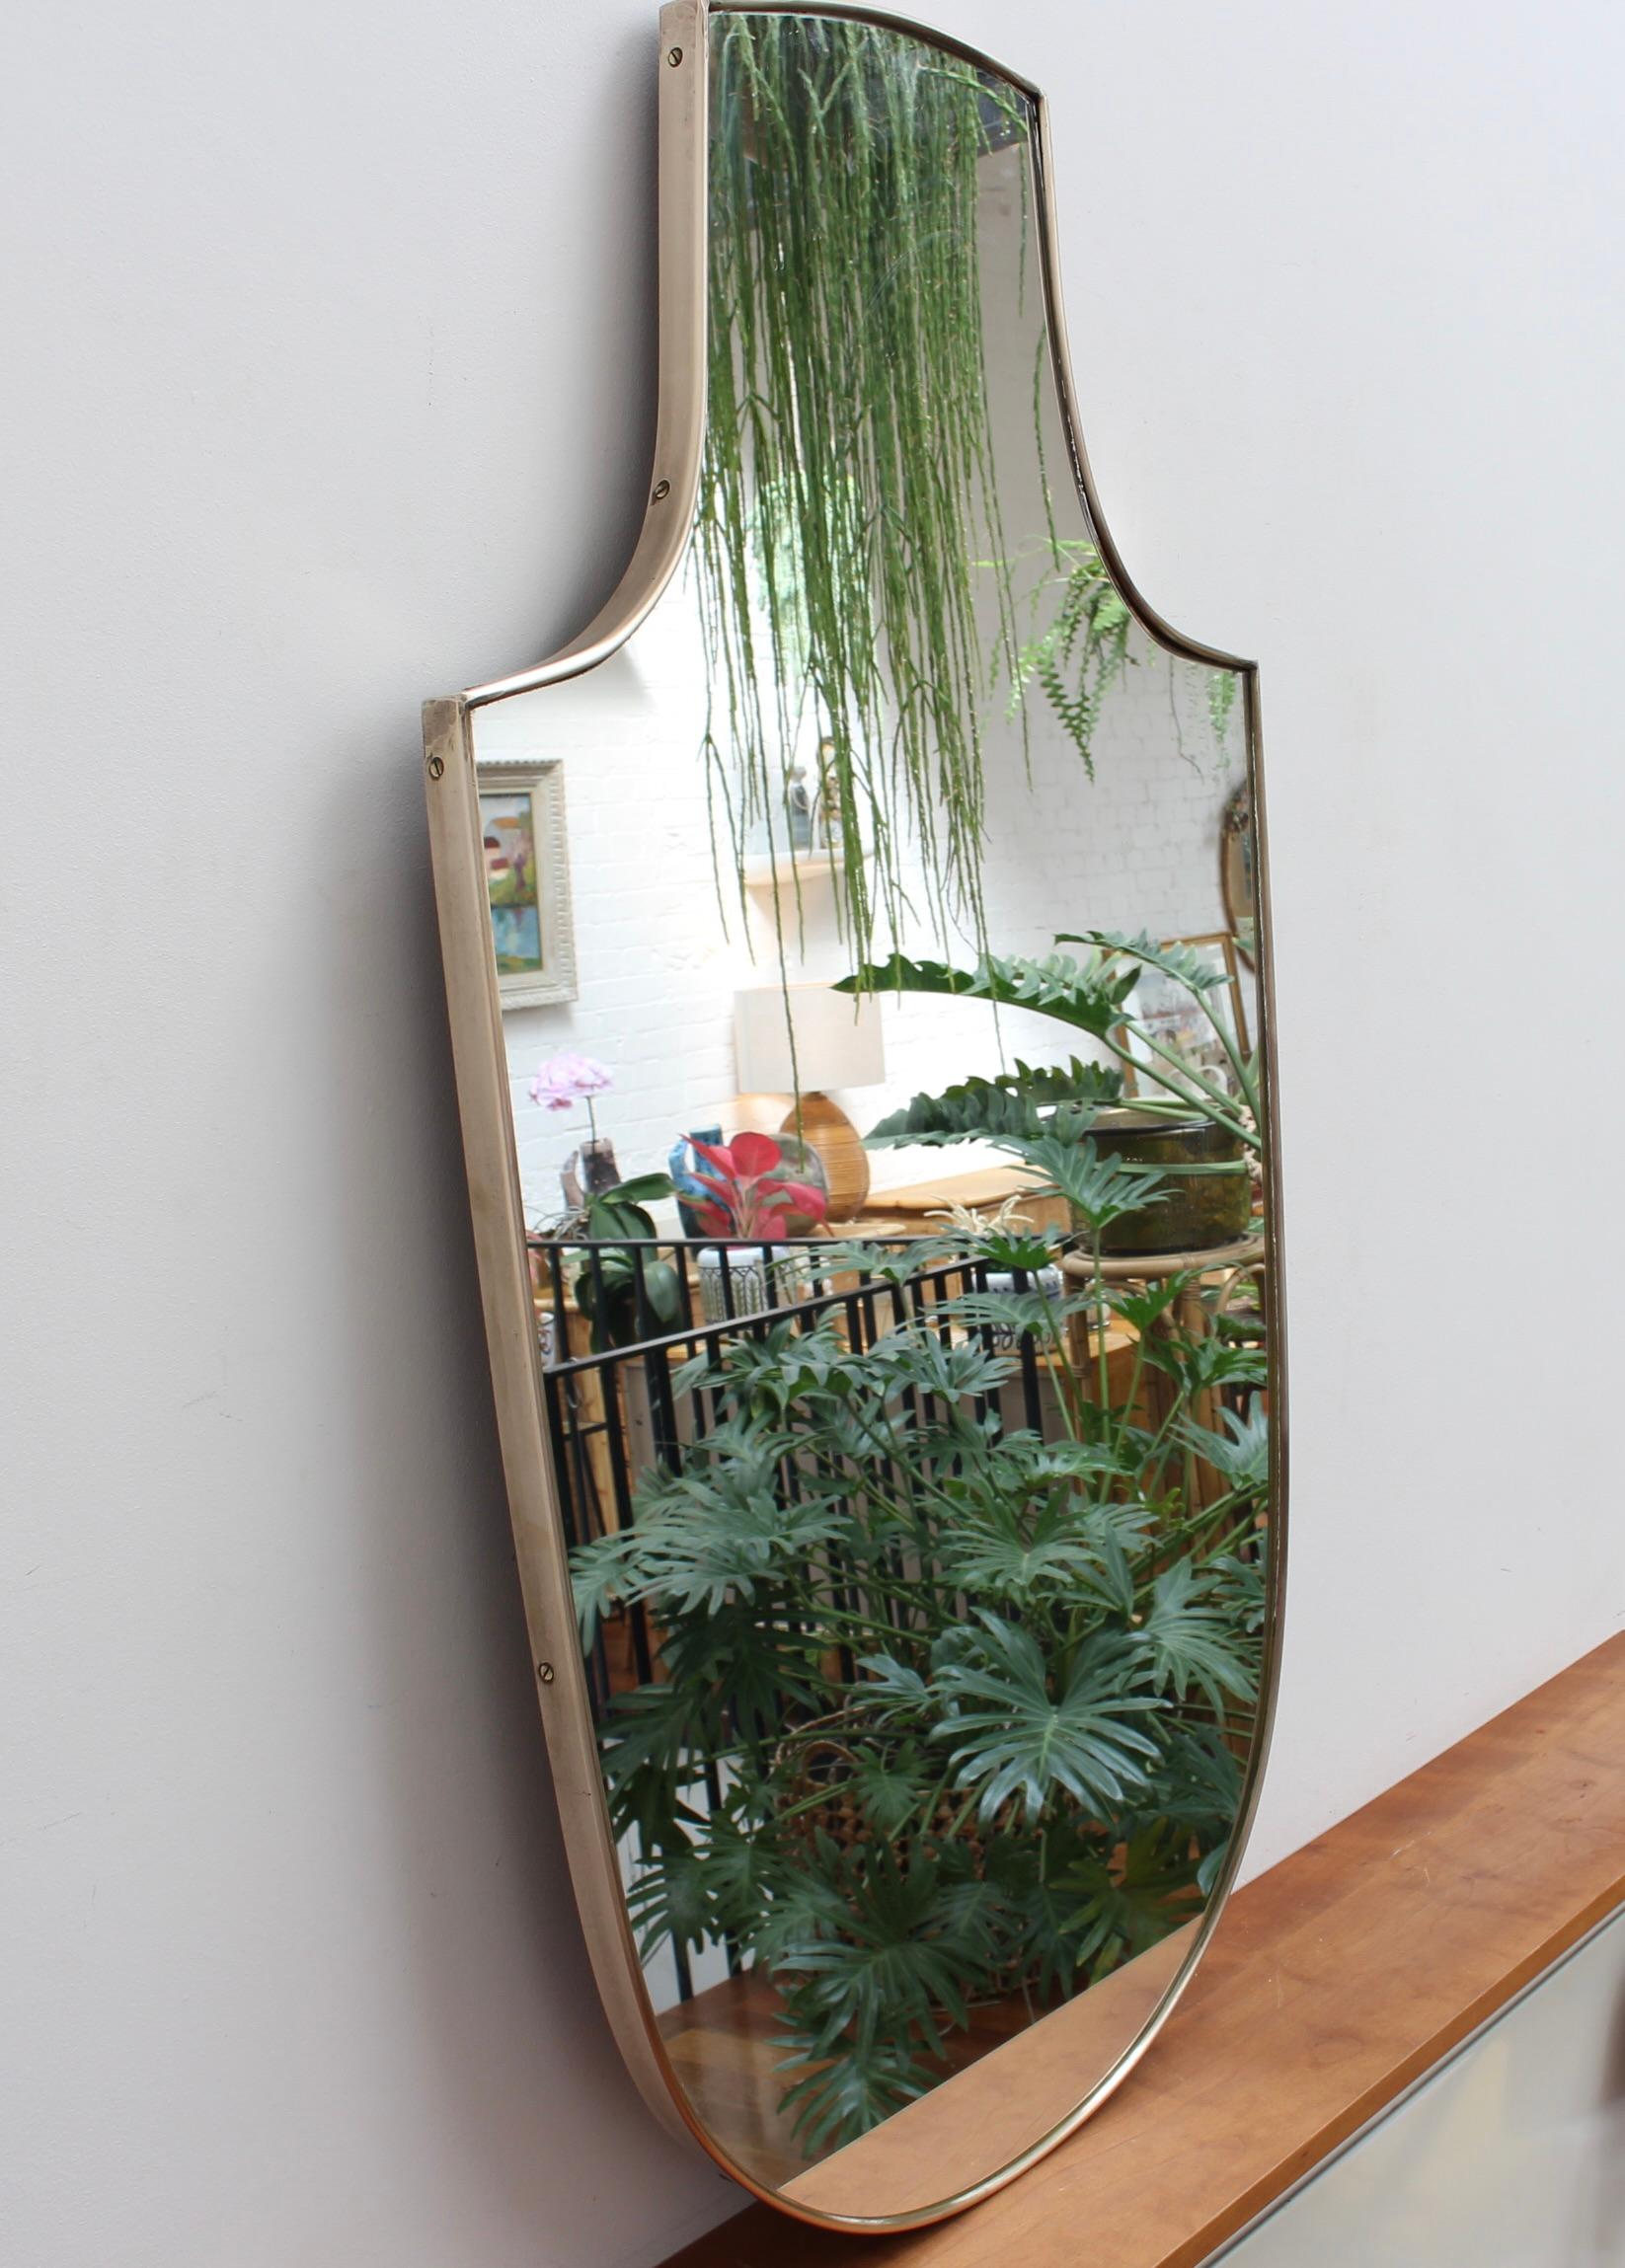 Midcentury Italian wall mirror with brass frame (circa 1950s). The mirror is classically-shaped and distinctive in a Modern style. It is in good overall condition with just a slight blemish on the glass (see photos). A beautiful patina develops on